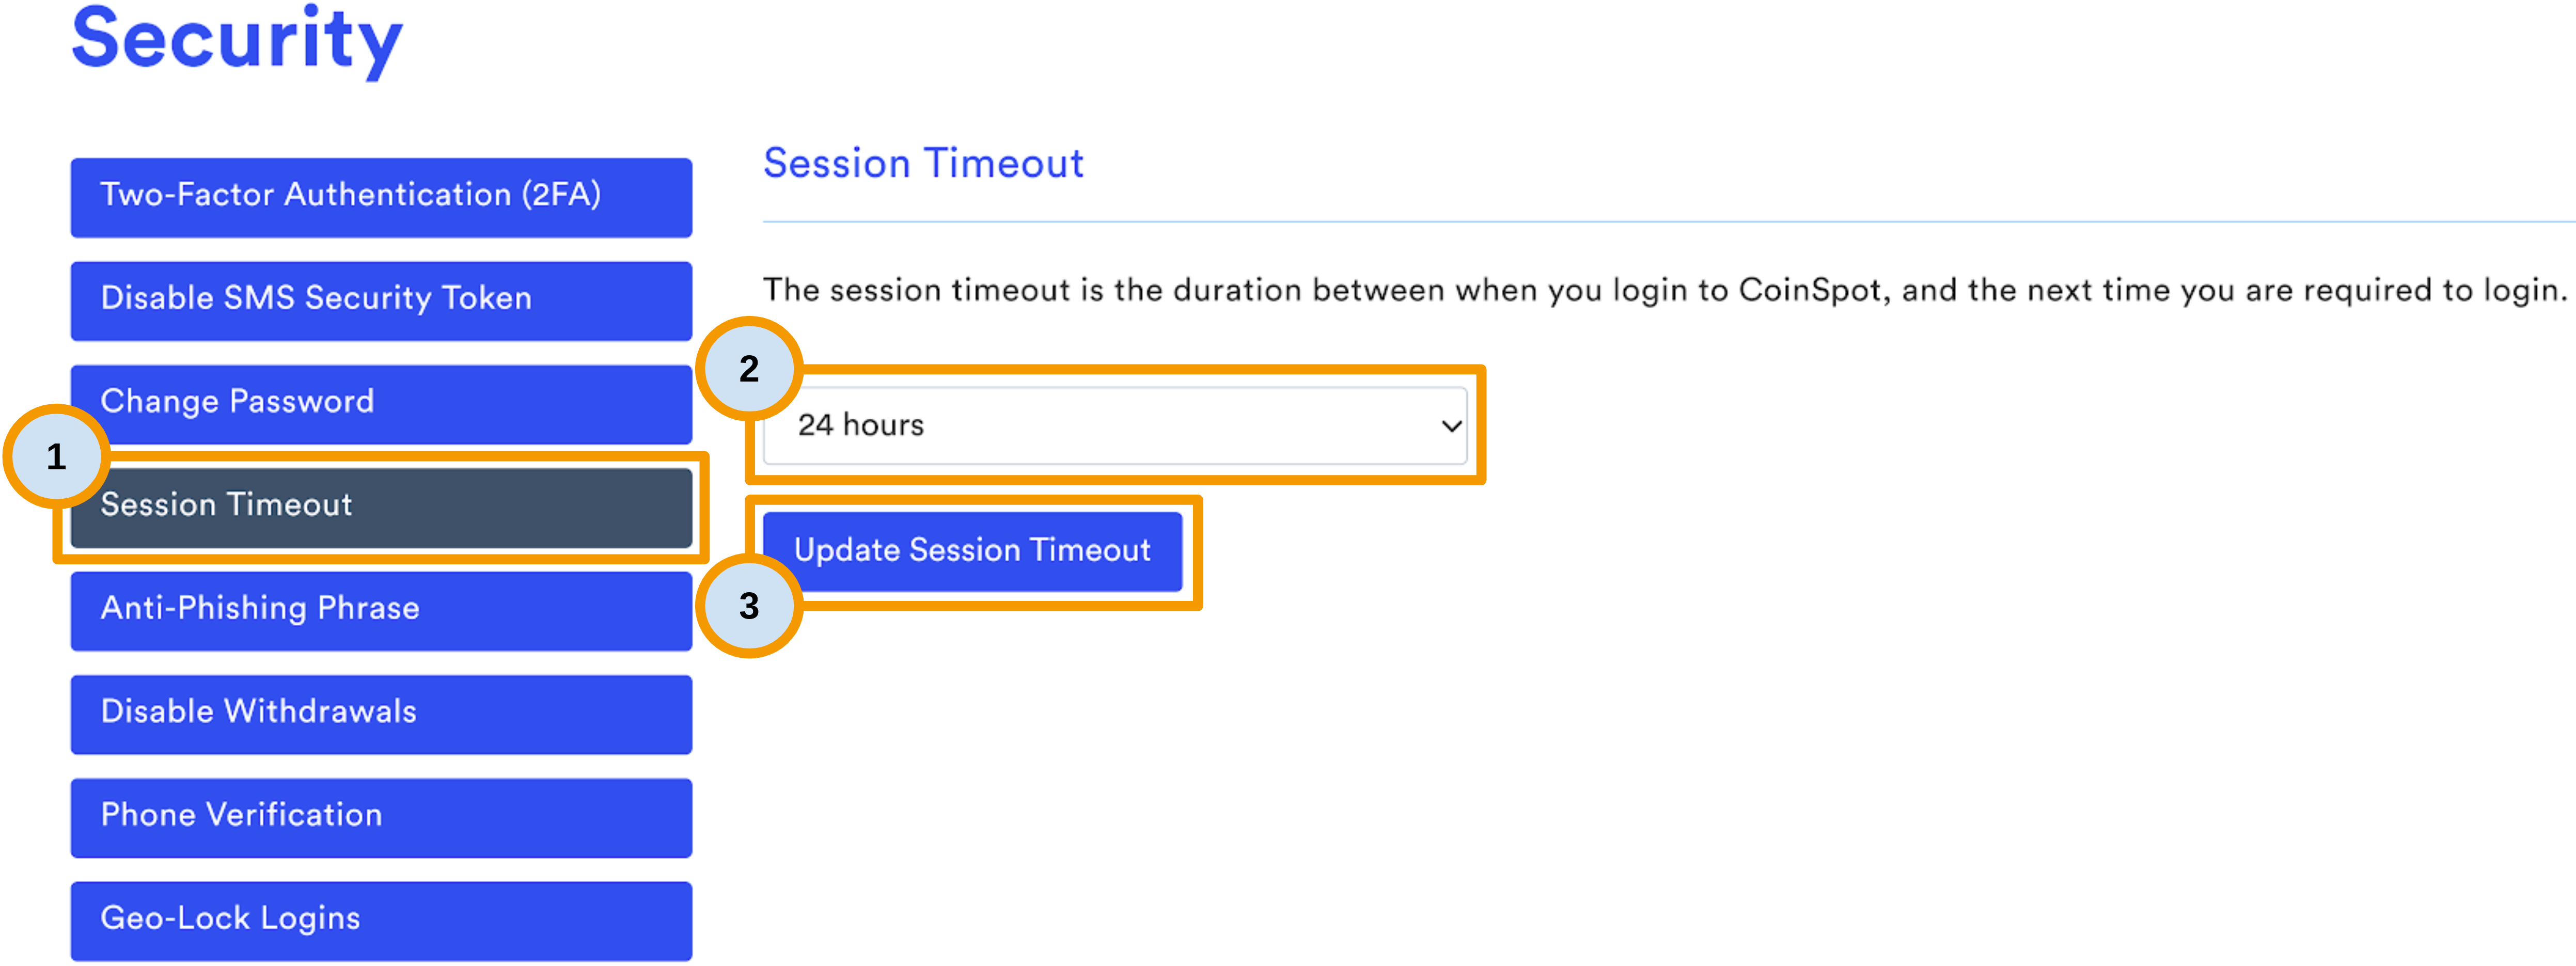 CoinSpot_Session_Timeout_v2.png